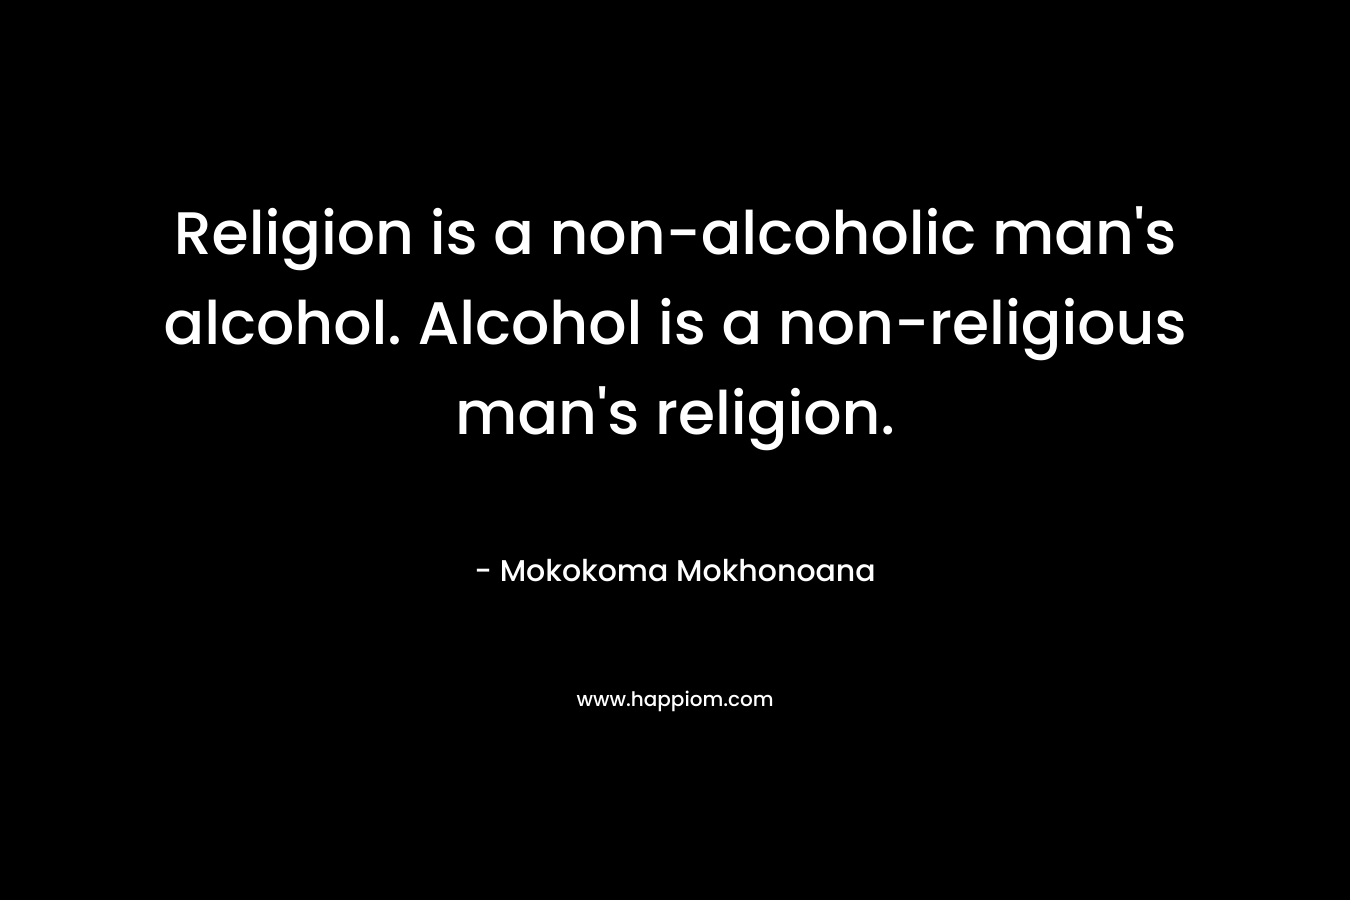 Religion is a non-alcoholic man's alcohol. Alcohol is a non-religious man's religion.